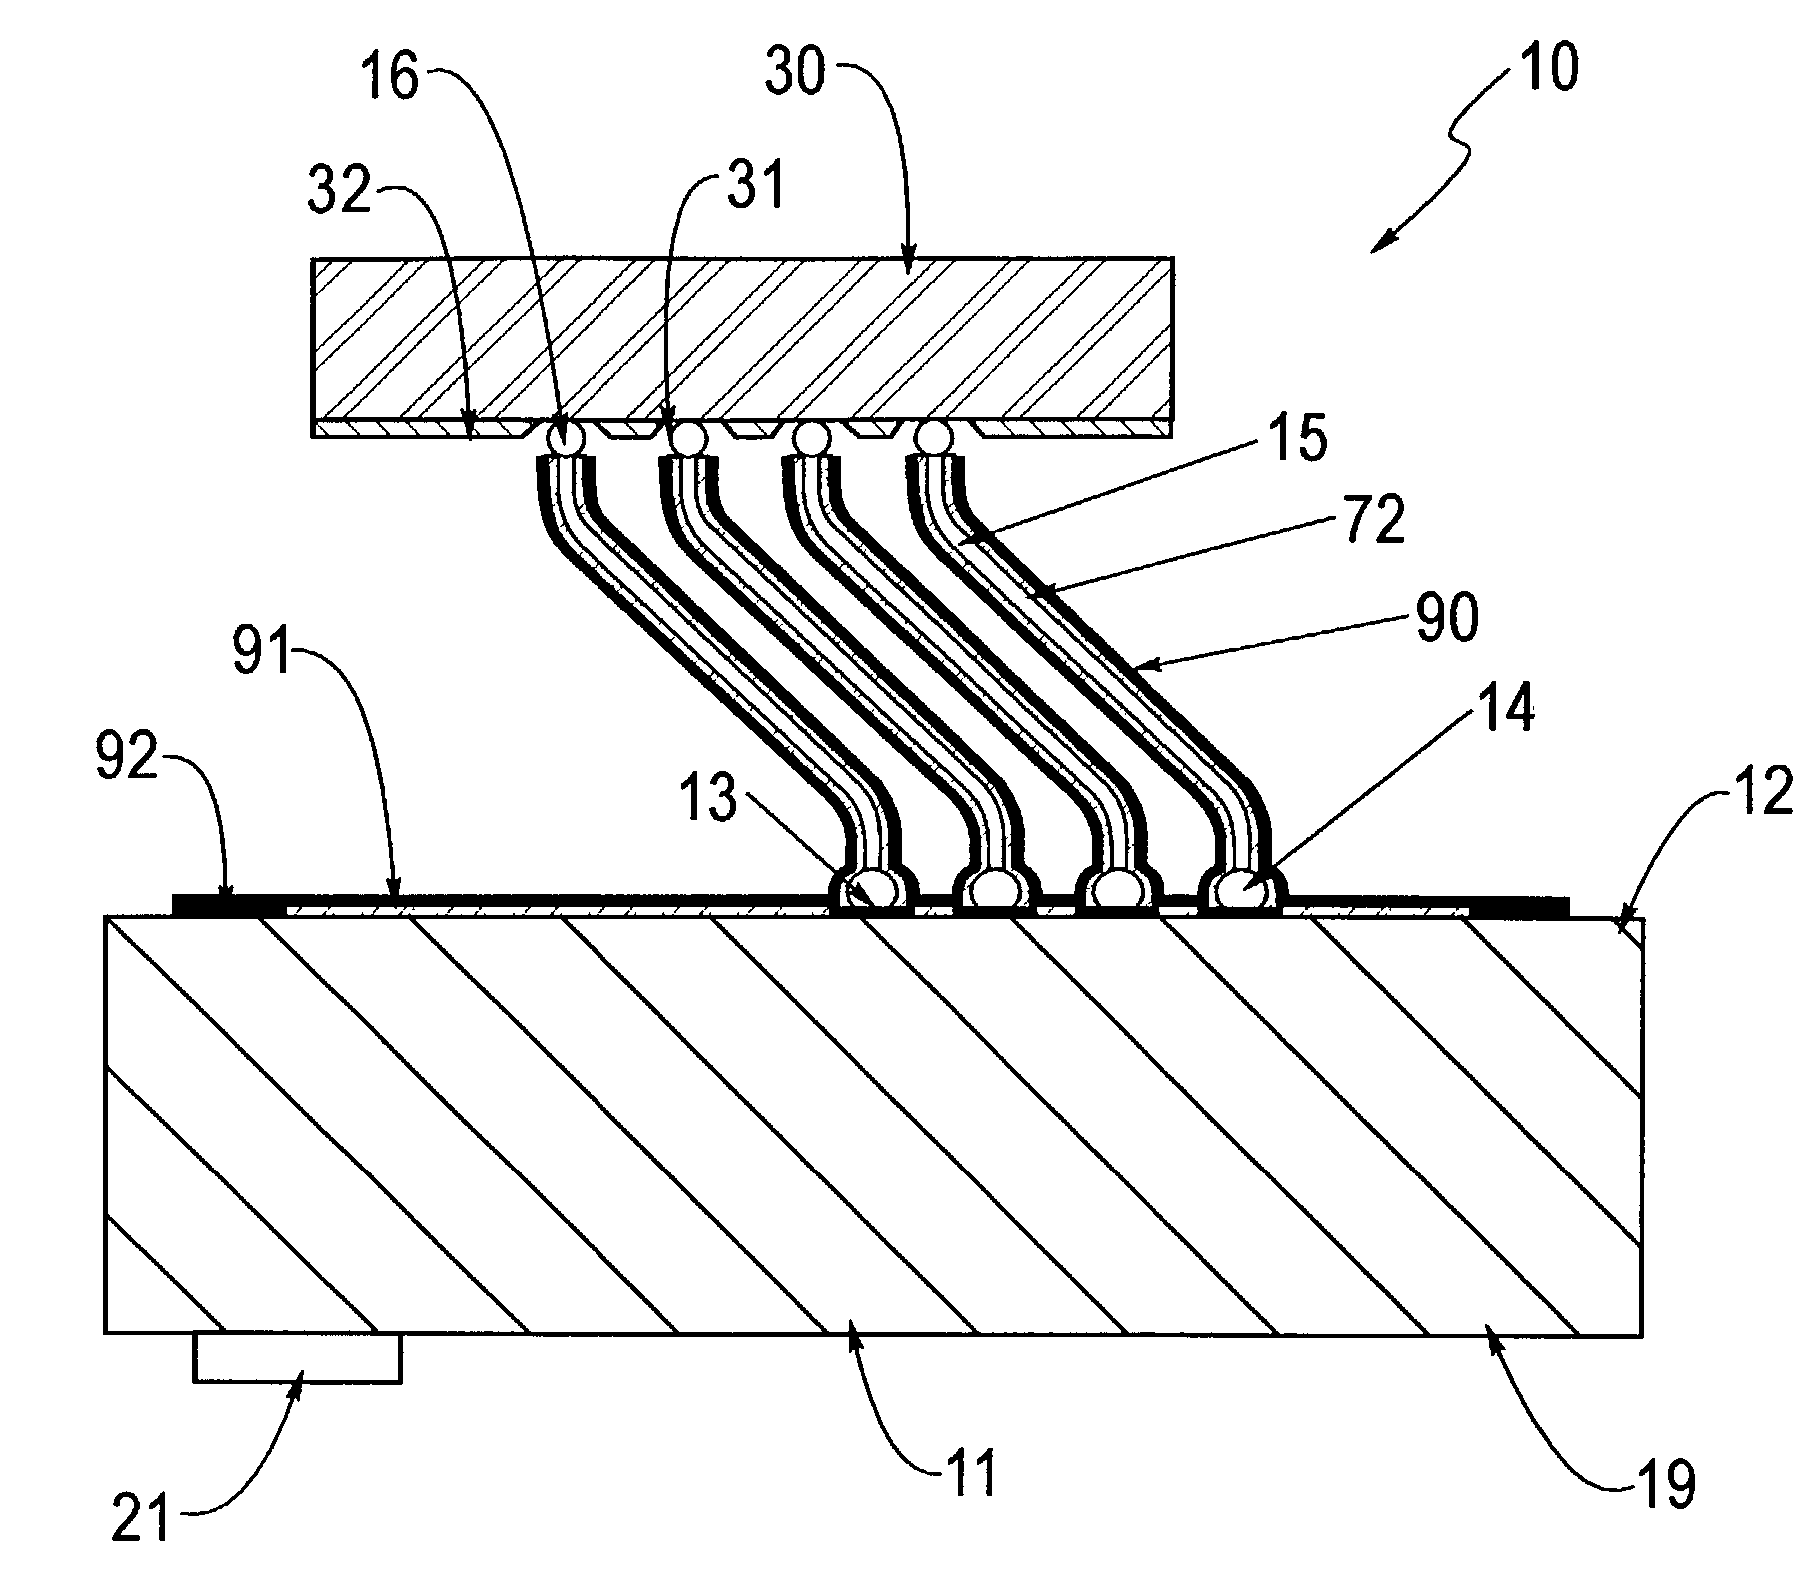 Probe structure having a plurality of discrete insulated probe tips projecting from a support surface, apparatus for use thereof and methods of fabrication thereof